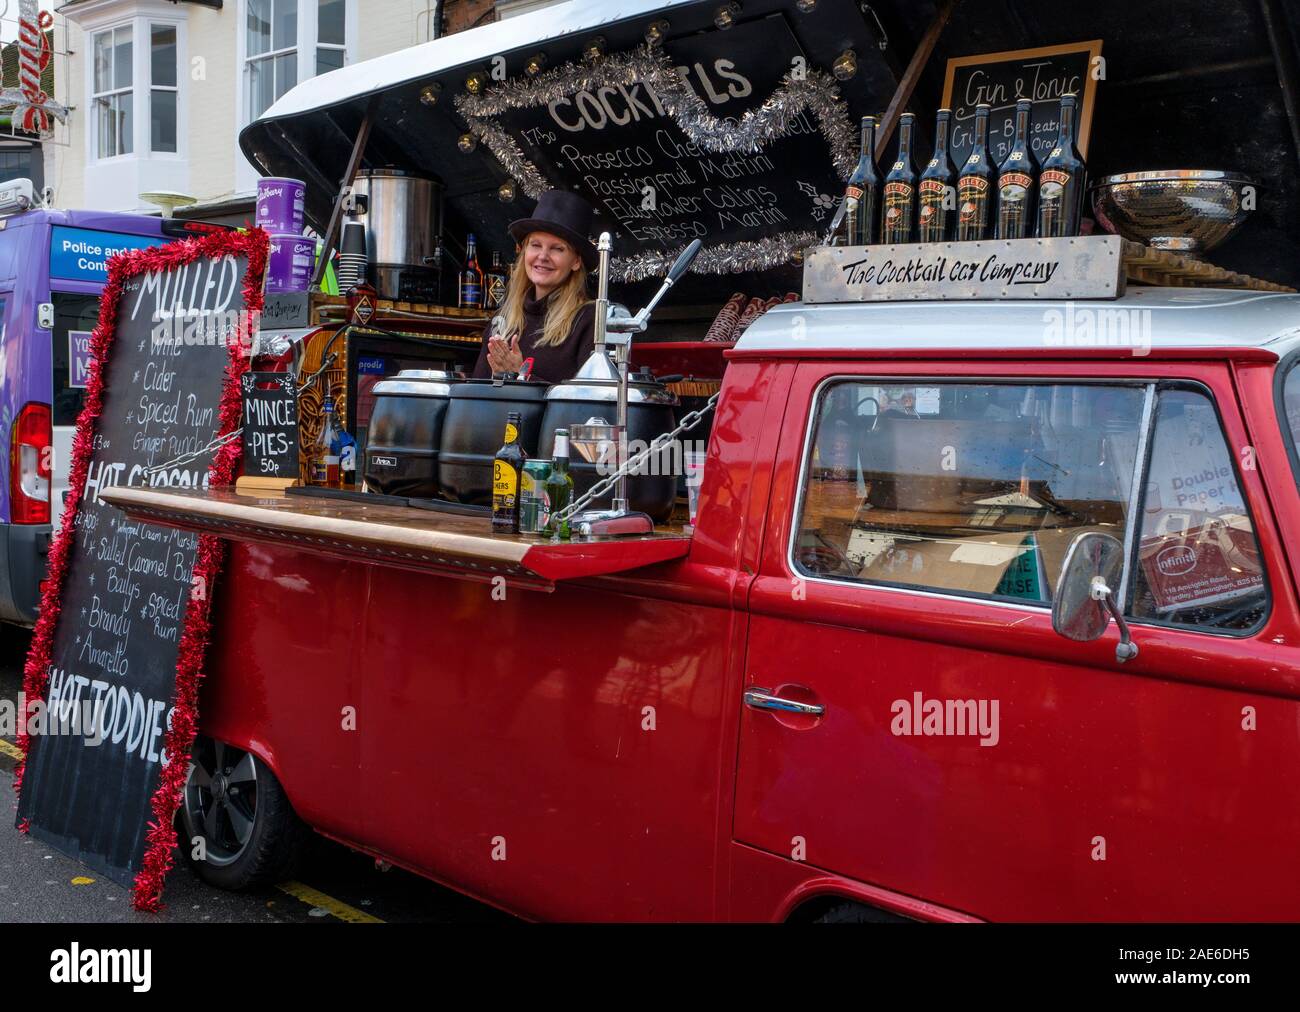 A VW Camper van modified into a mobile bar Stock Photo - Alamy